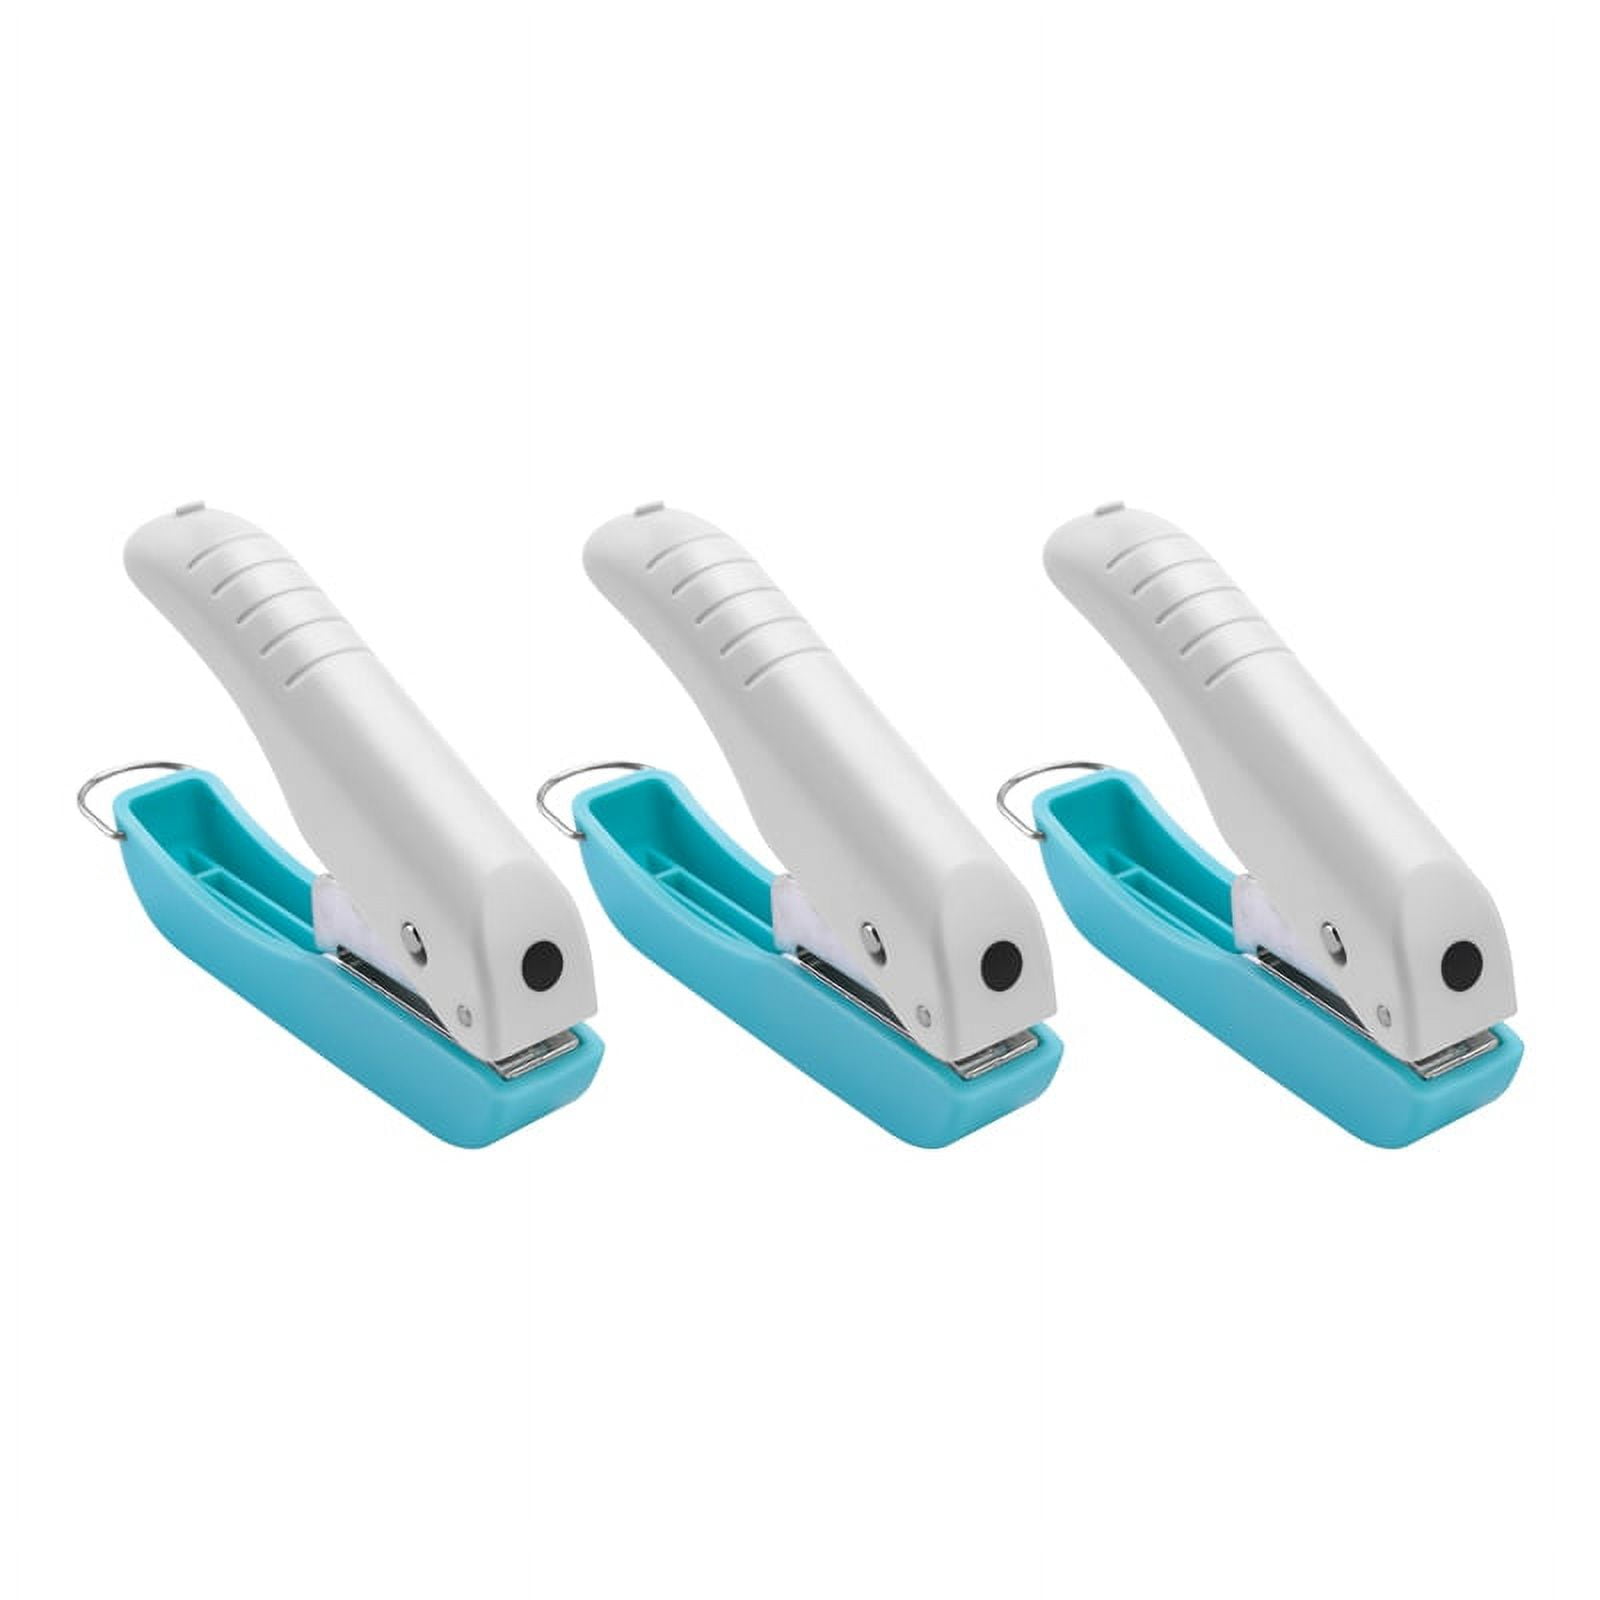 Generic 3PCS Paper Hole Punch Shapes, Single Hole Puncher for @ Best Price  Online